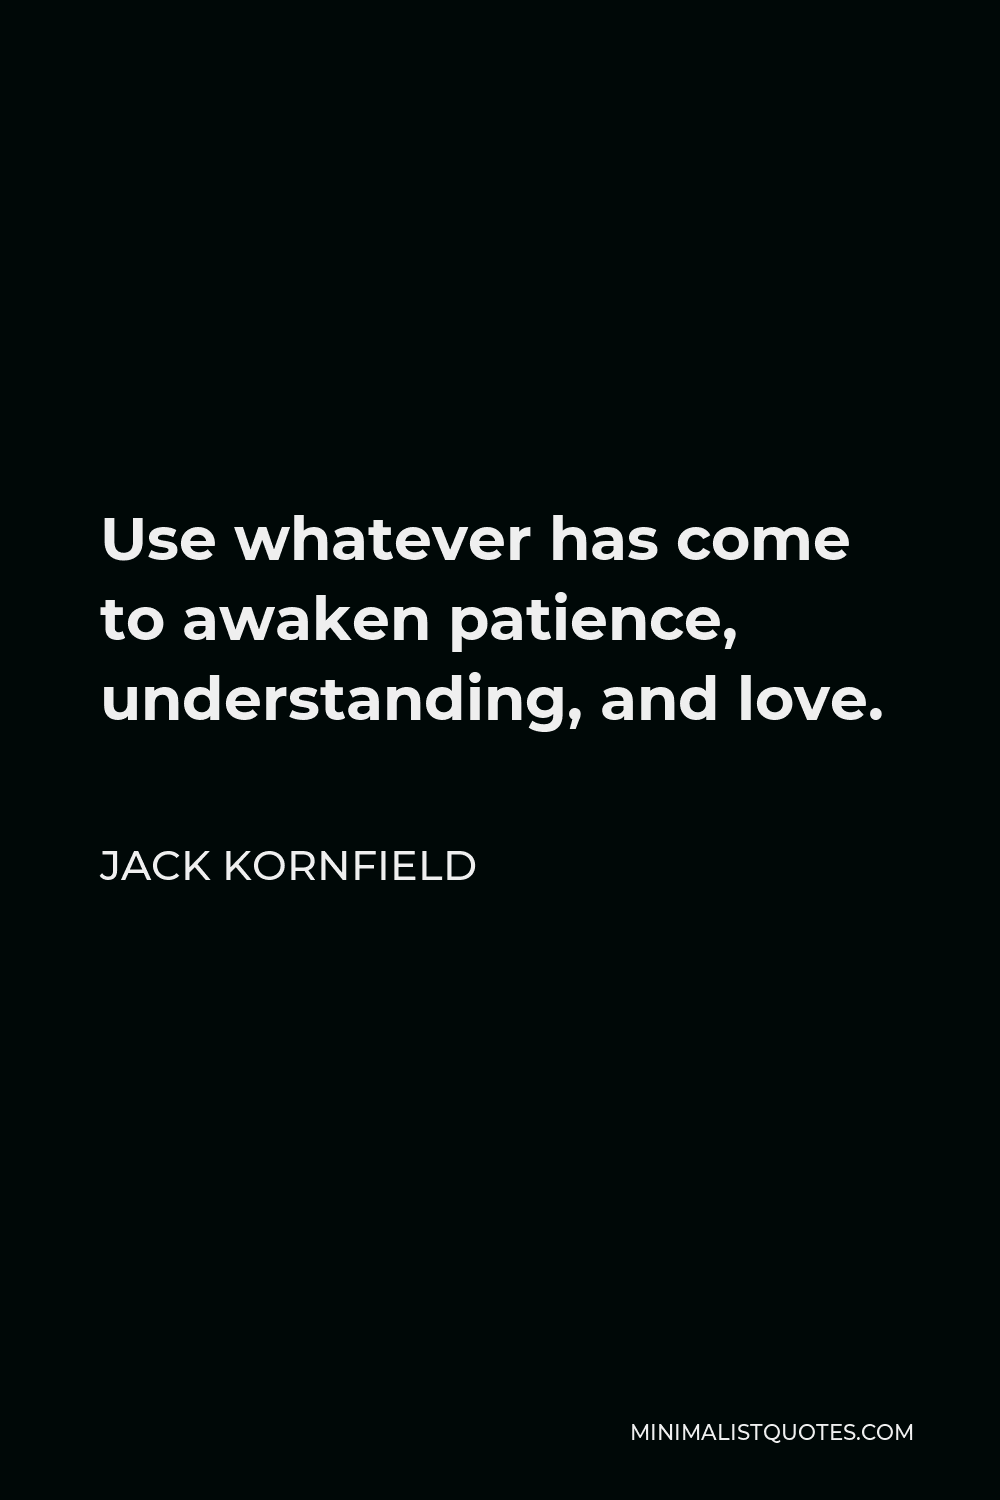 Jack Kornfield Quote - Use whatever has come to awaken patience, understanding, and love.